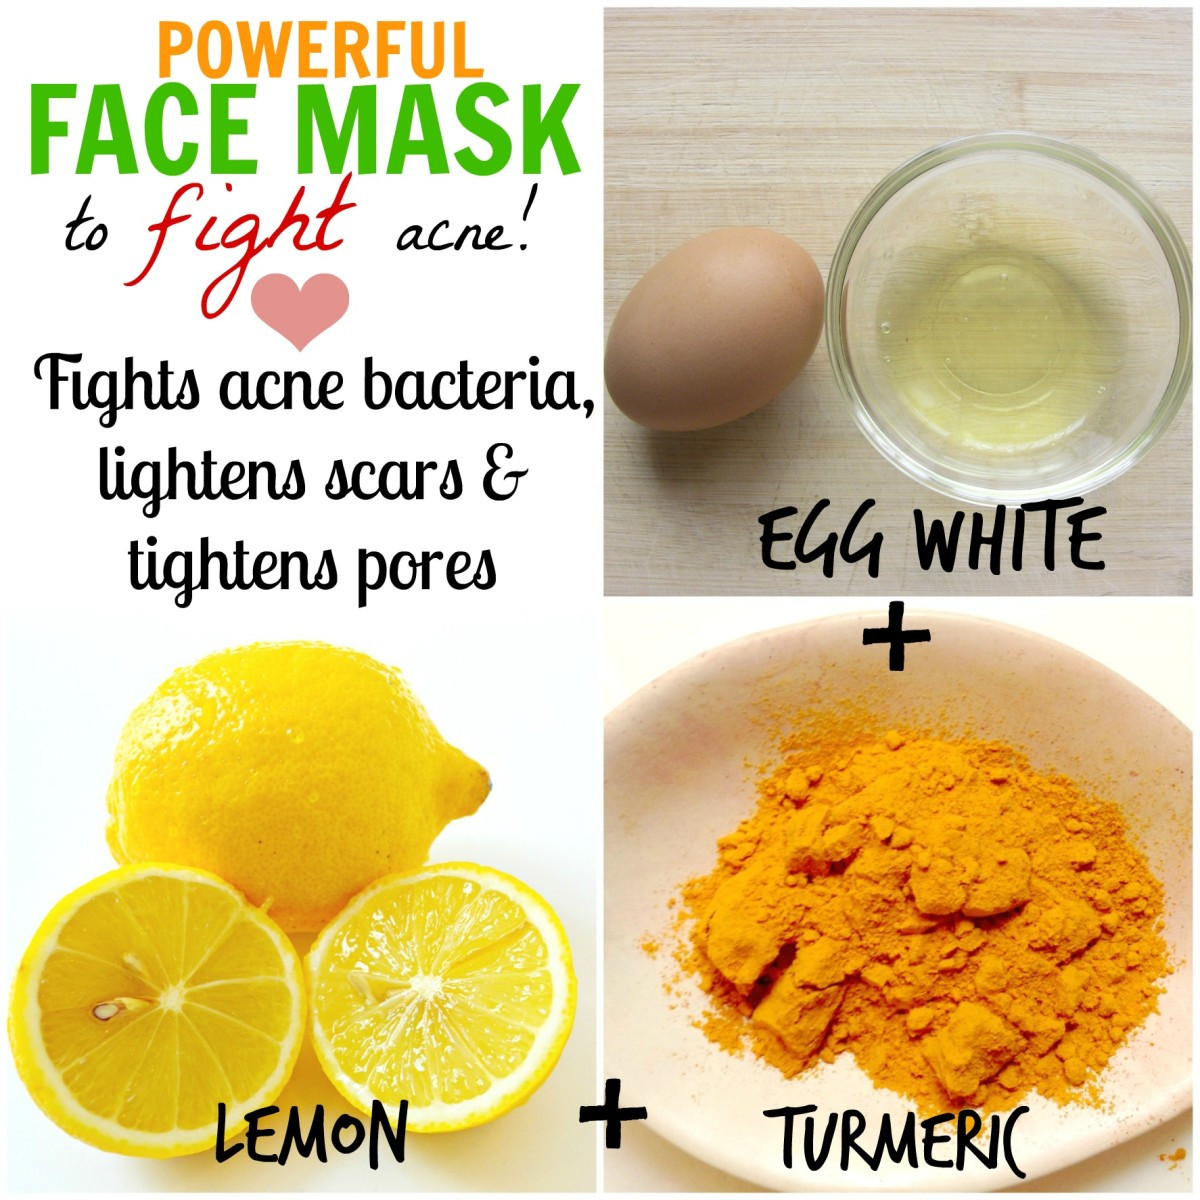 DIY Face Mask For Oily Skin And Acne
 DIY Homemade Face Masks for Acne How to Stop Pimples